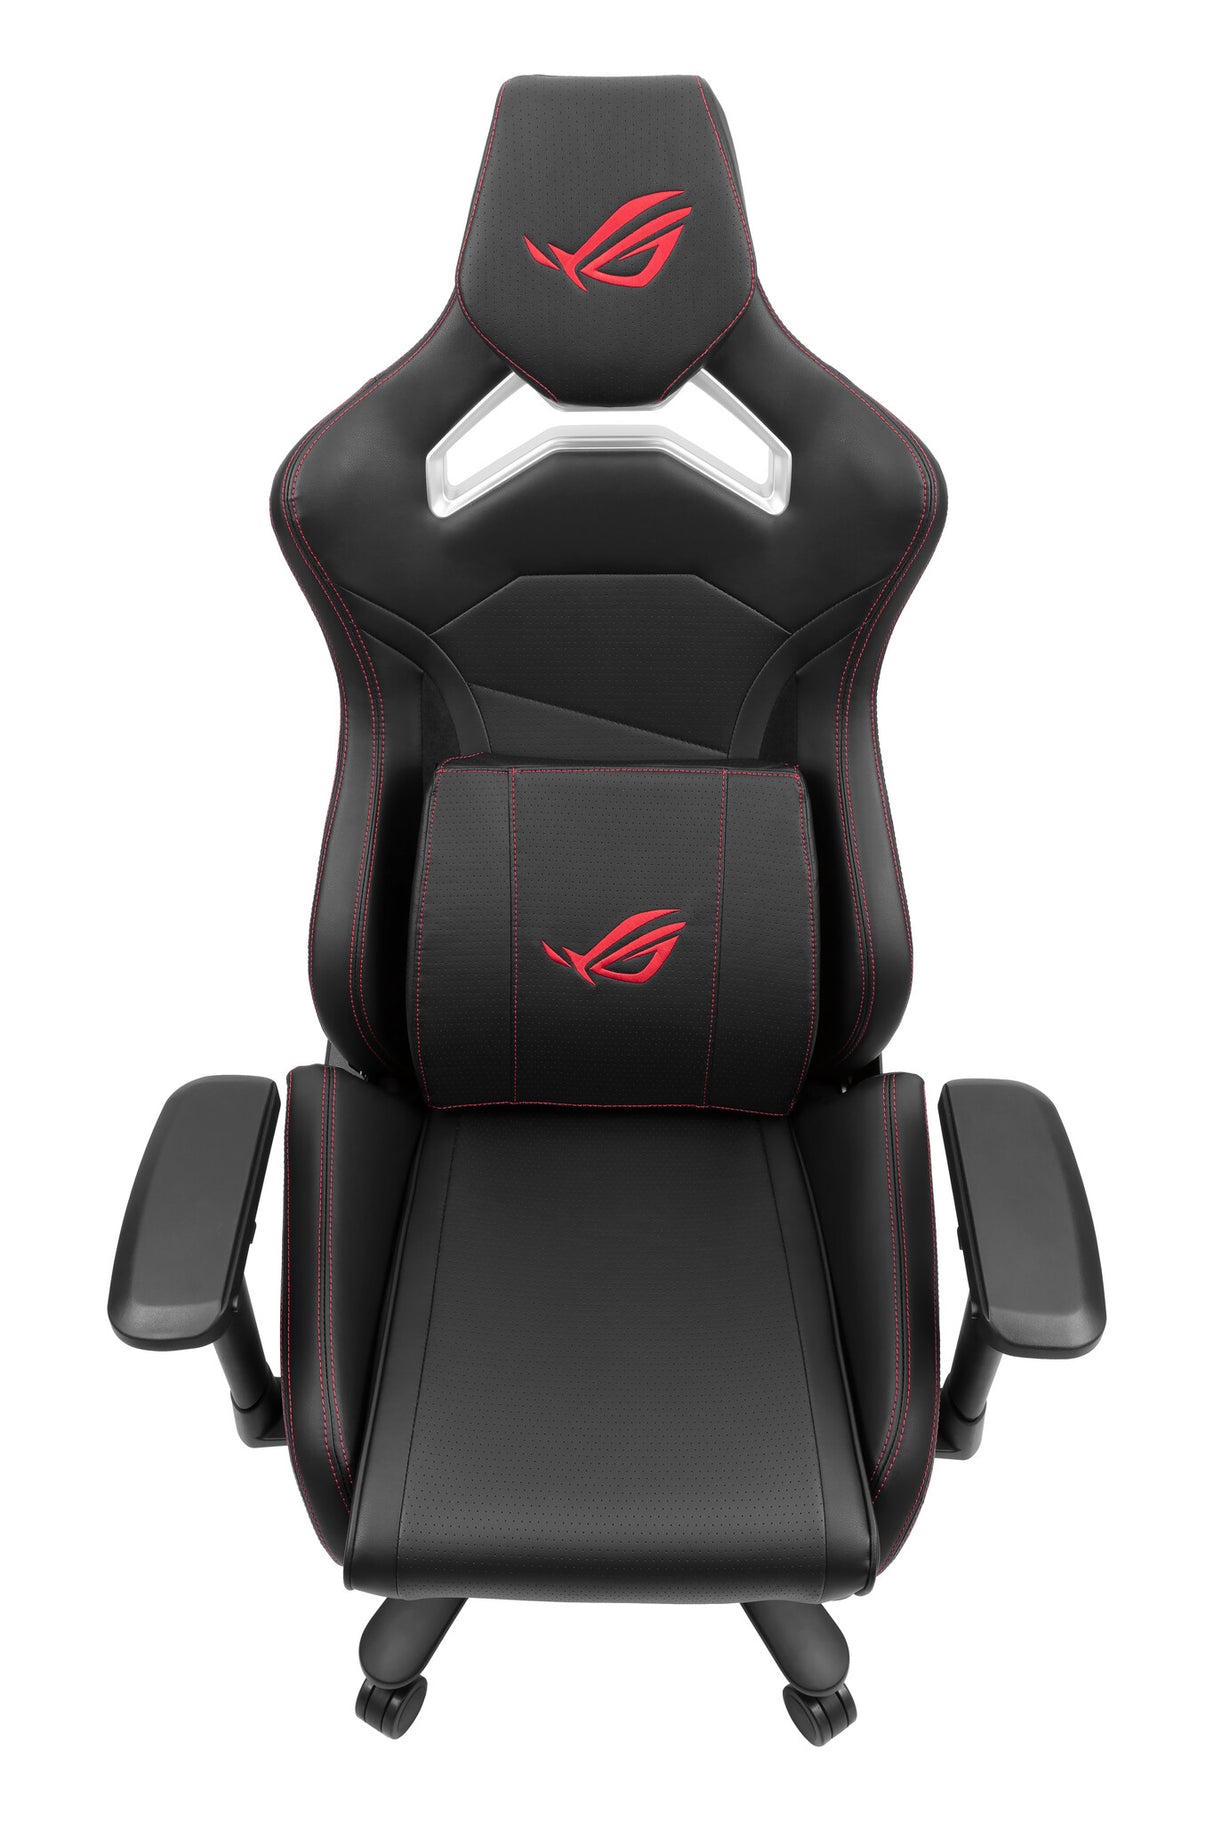 ASUS ROG Chariot Core Universal gaming chair Upholstered padded seat Black